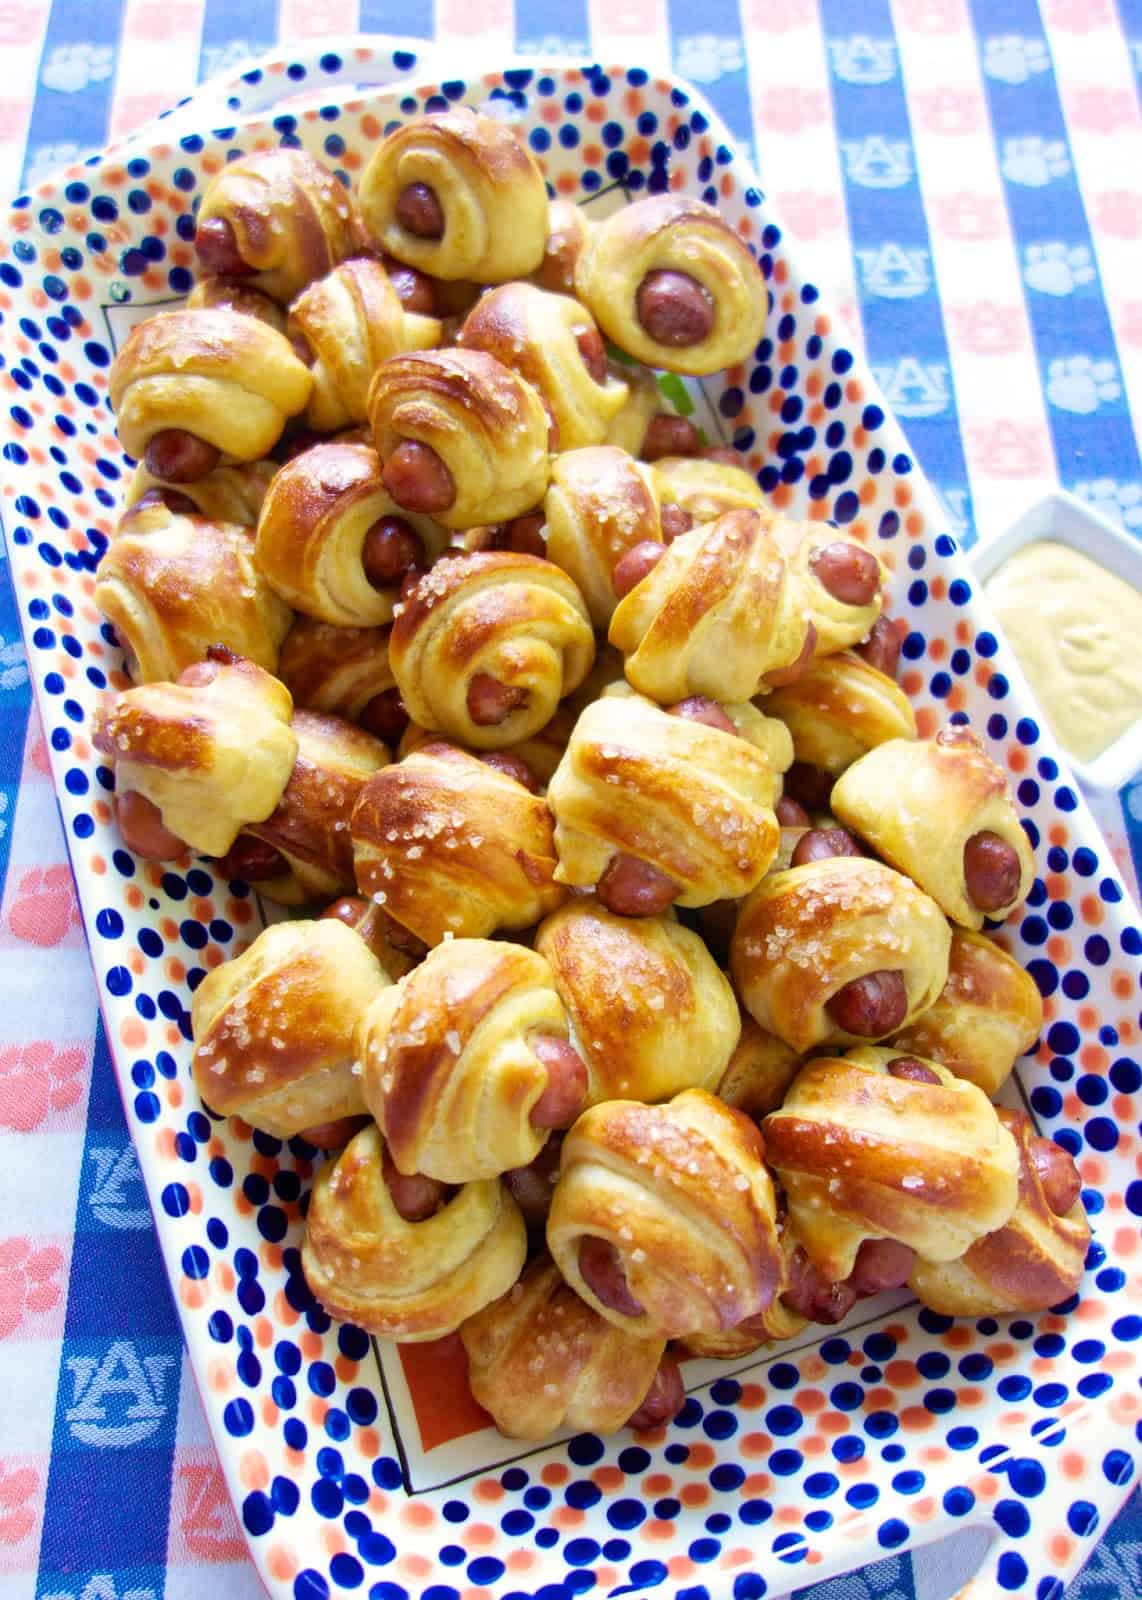 Pretzel Pigs in a Blanket - transform refrigerated crescent rolls into a delicious snack! These are SO easy and SO addictive! You can't eat just one! Great for parties and tailgating. Everyone LOVES this easy appetizer recipe!